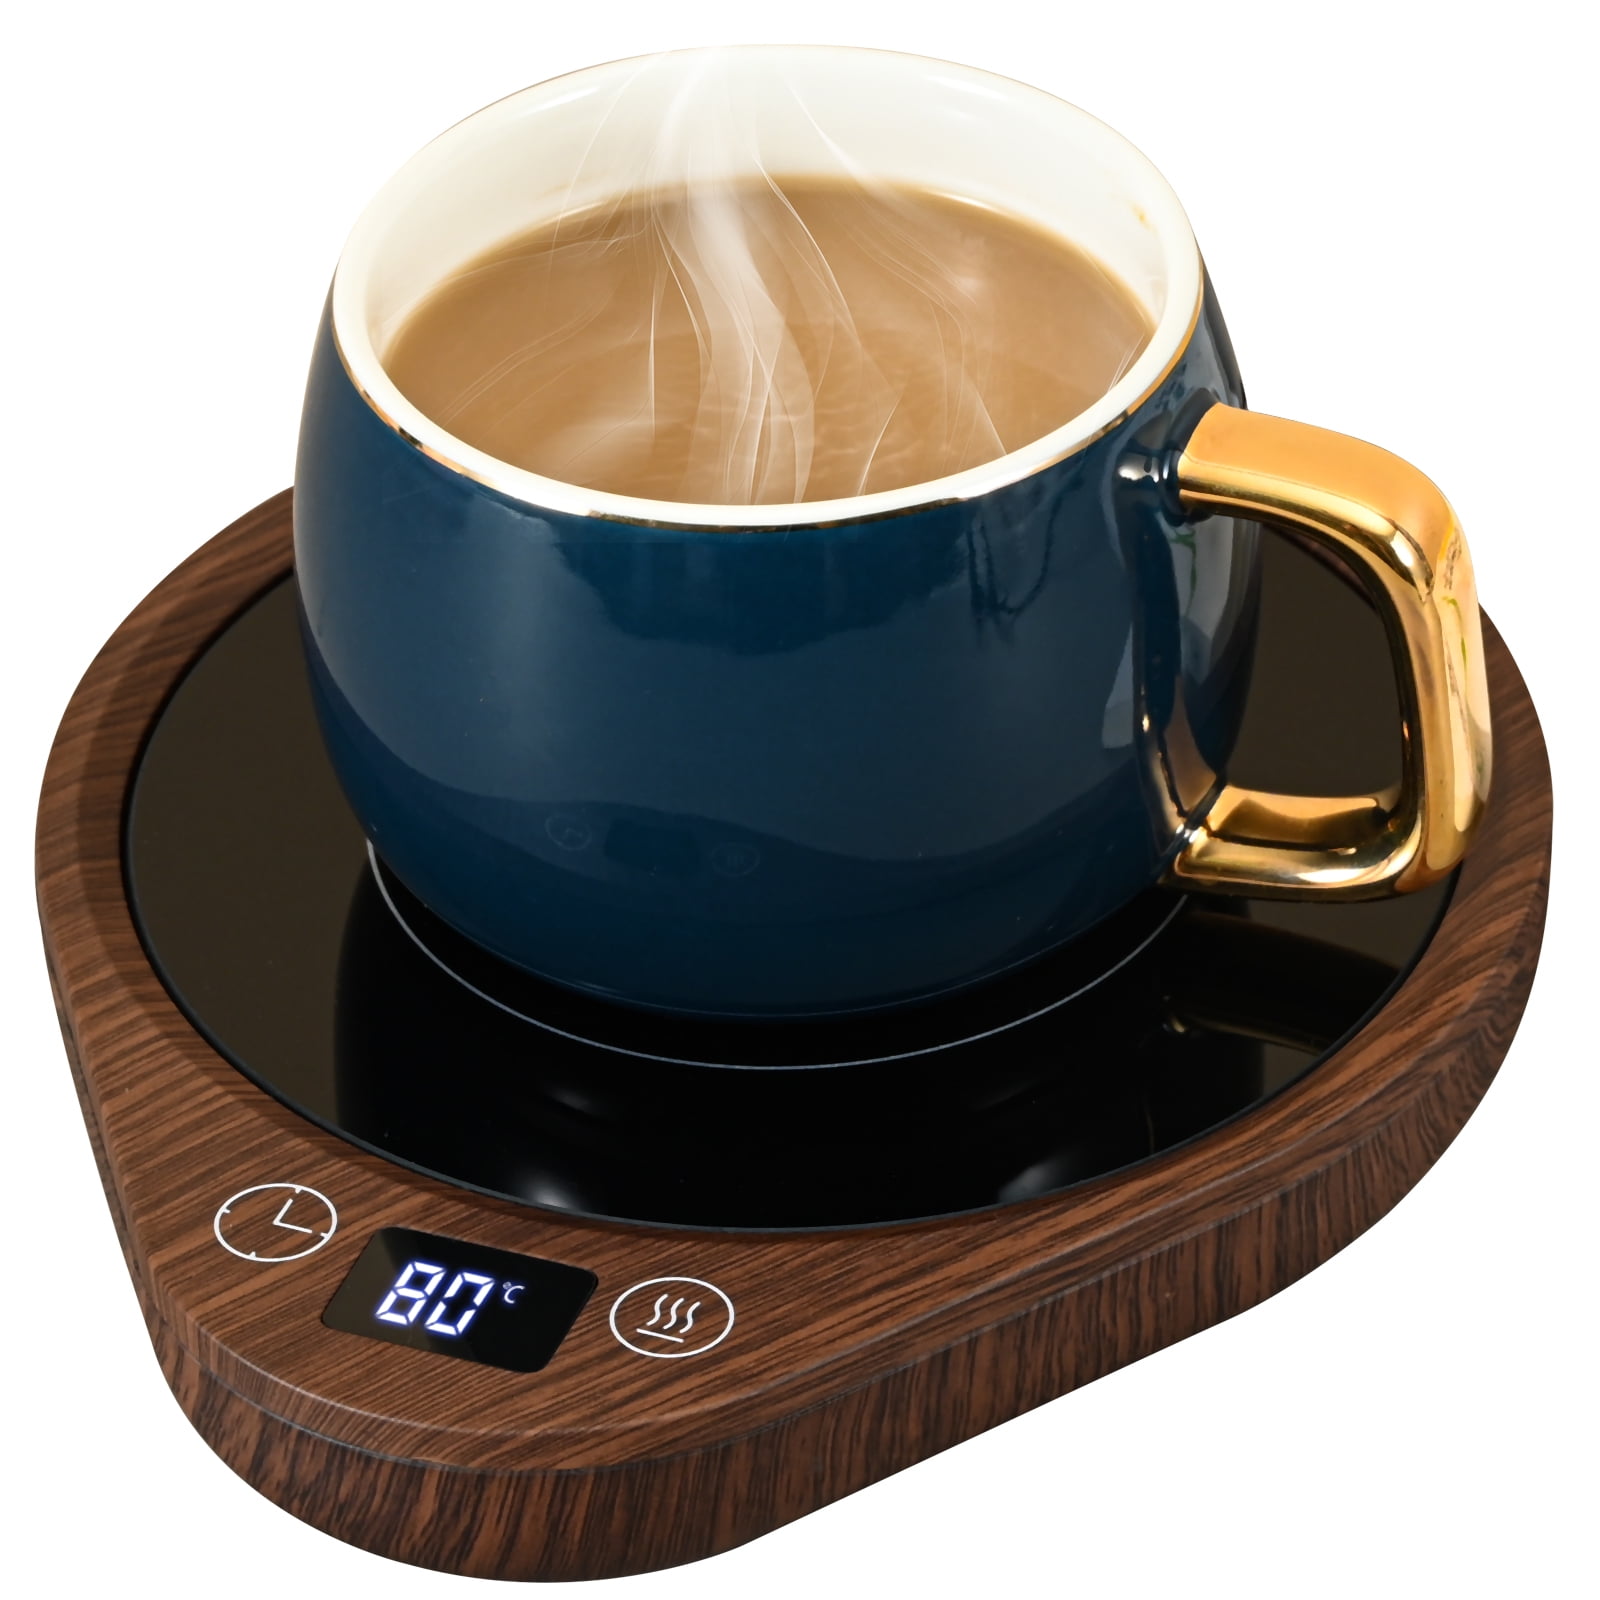 Coffee Mug Warmer with Auto-Off Timer, Coffee Warmer for Desk with Aut –  HeartFlowing